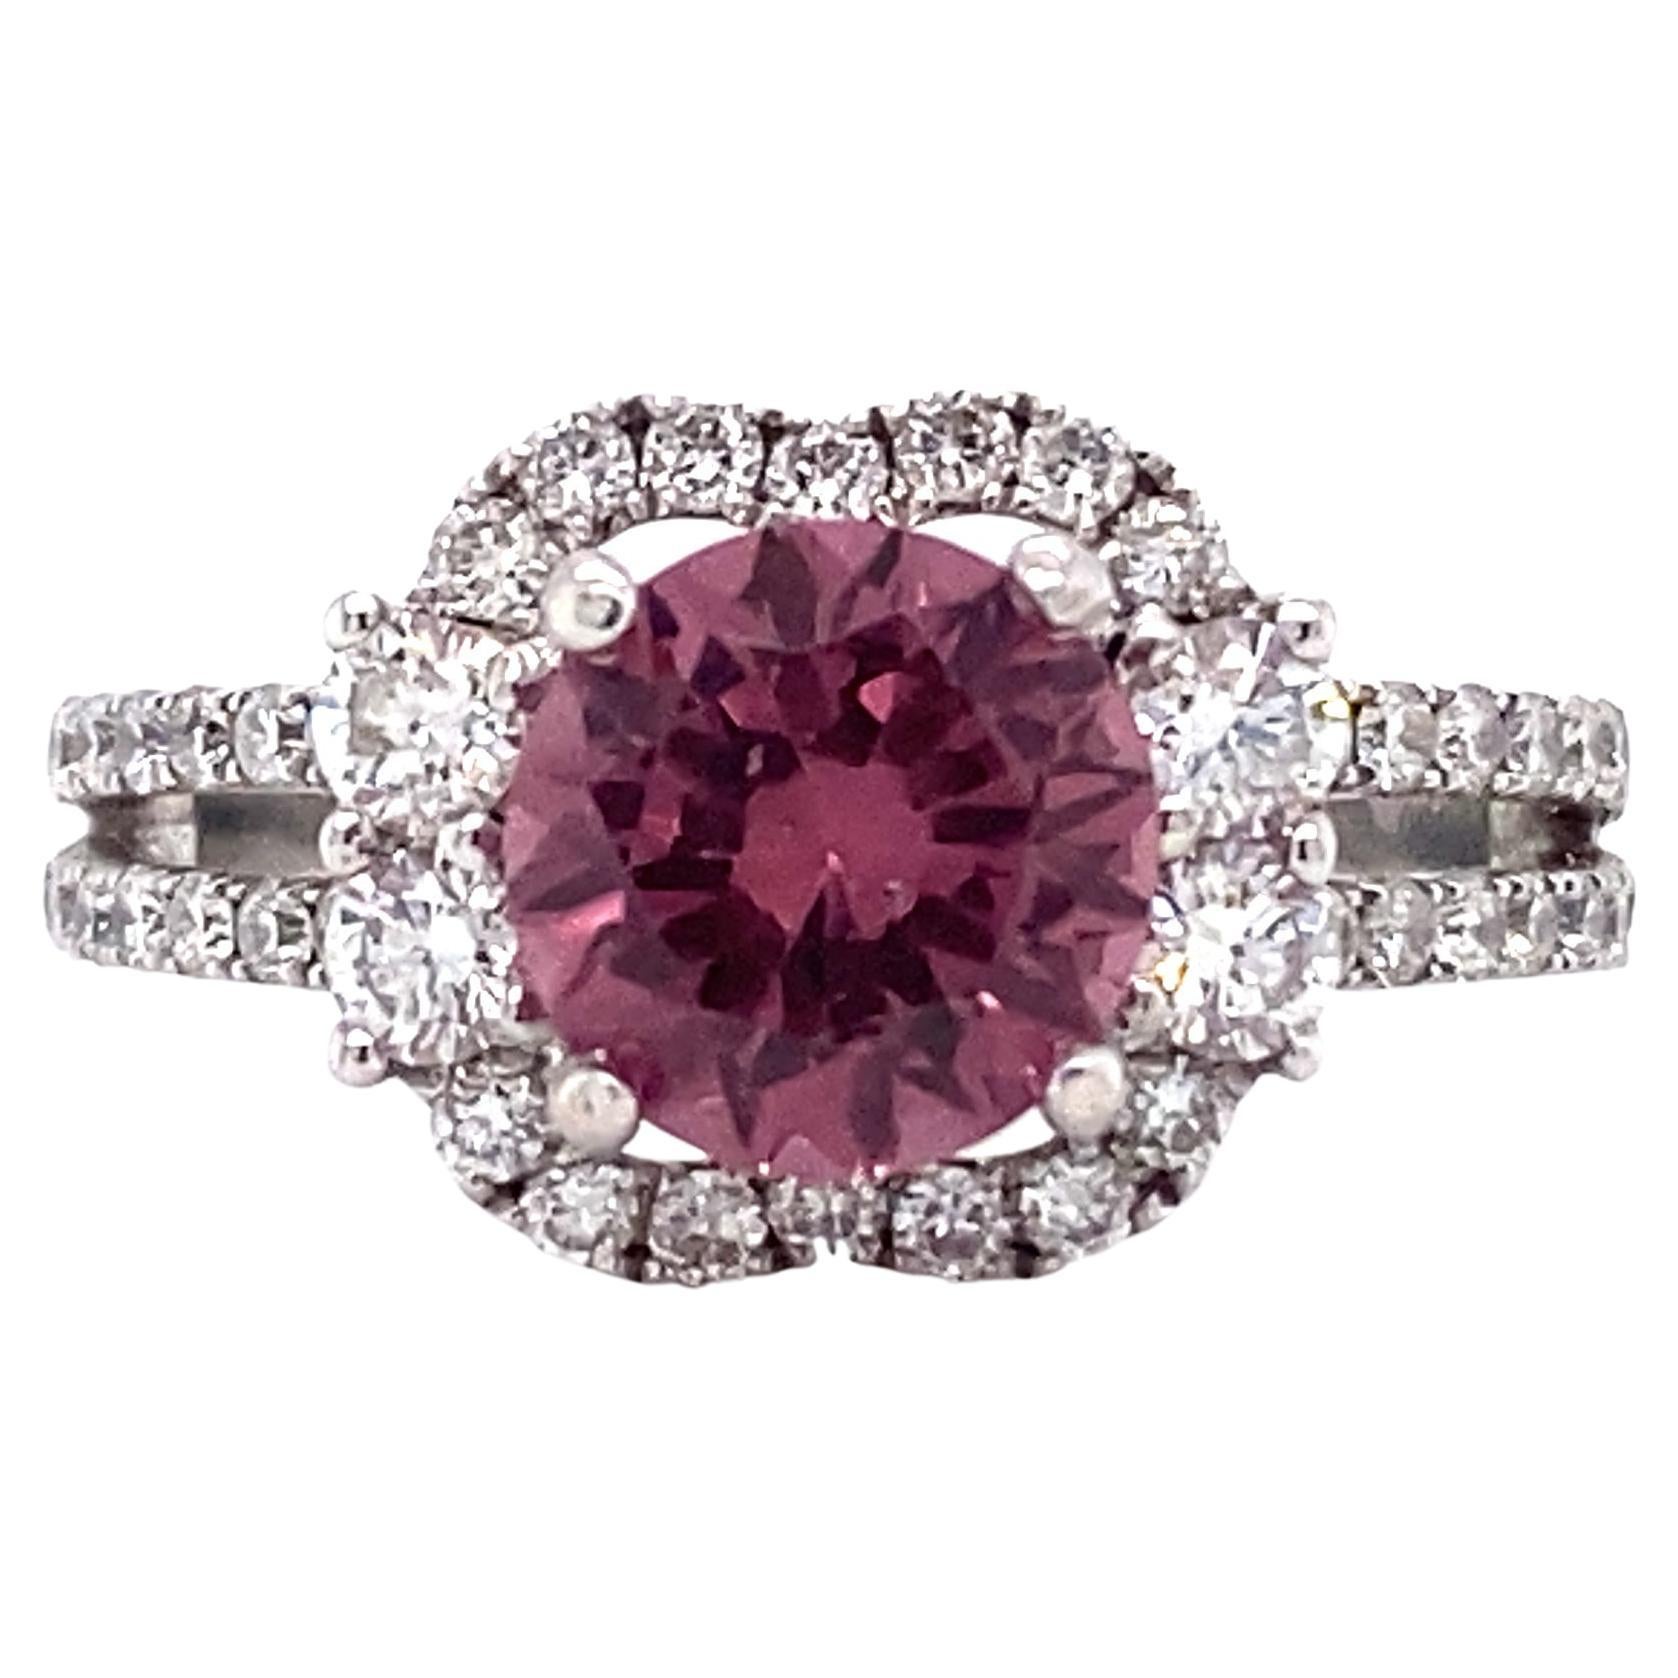 Circa 1980s Pink Tourmaline and Diamond Engagement Ring in 18K White Gold